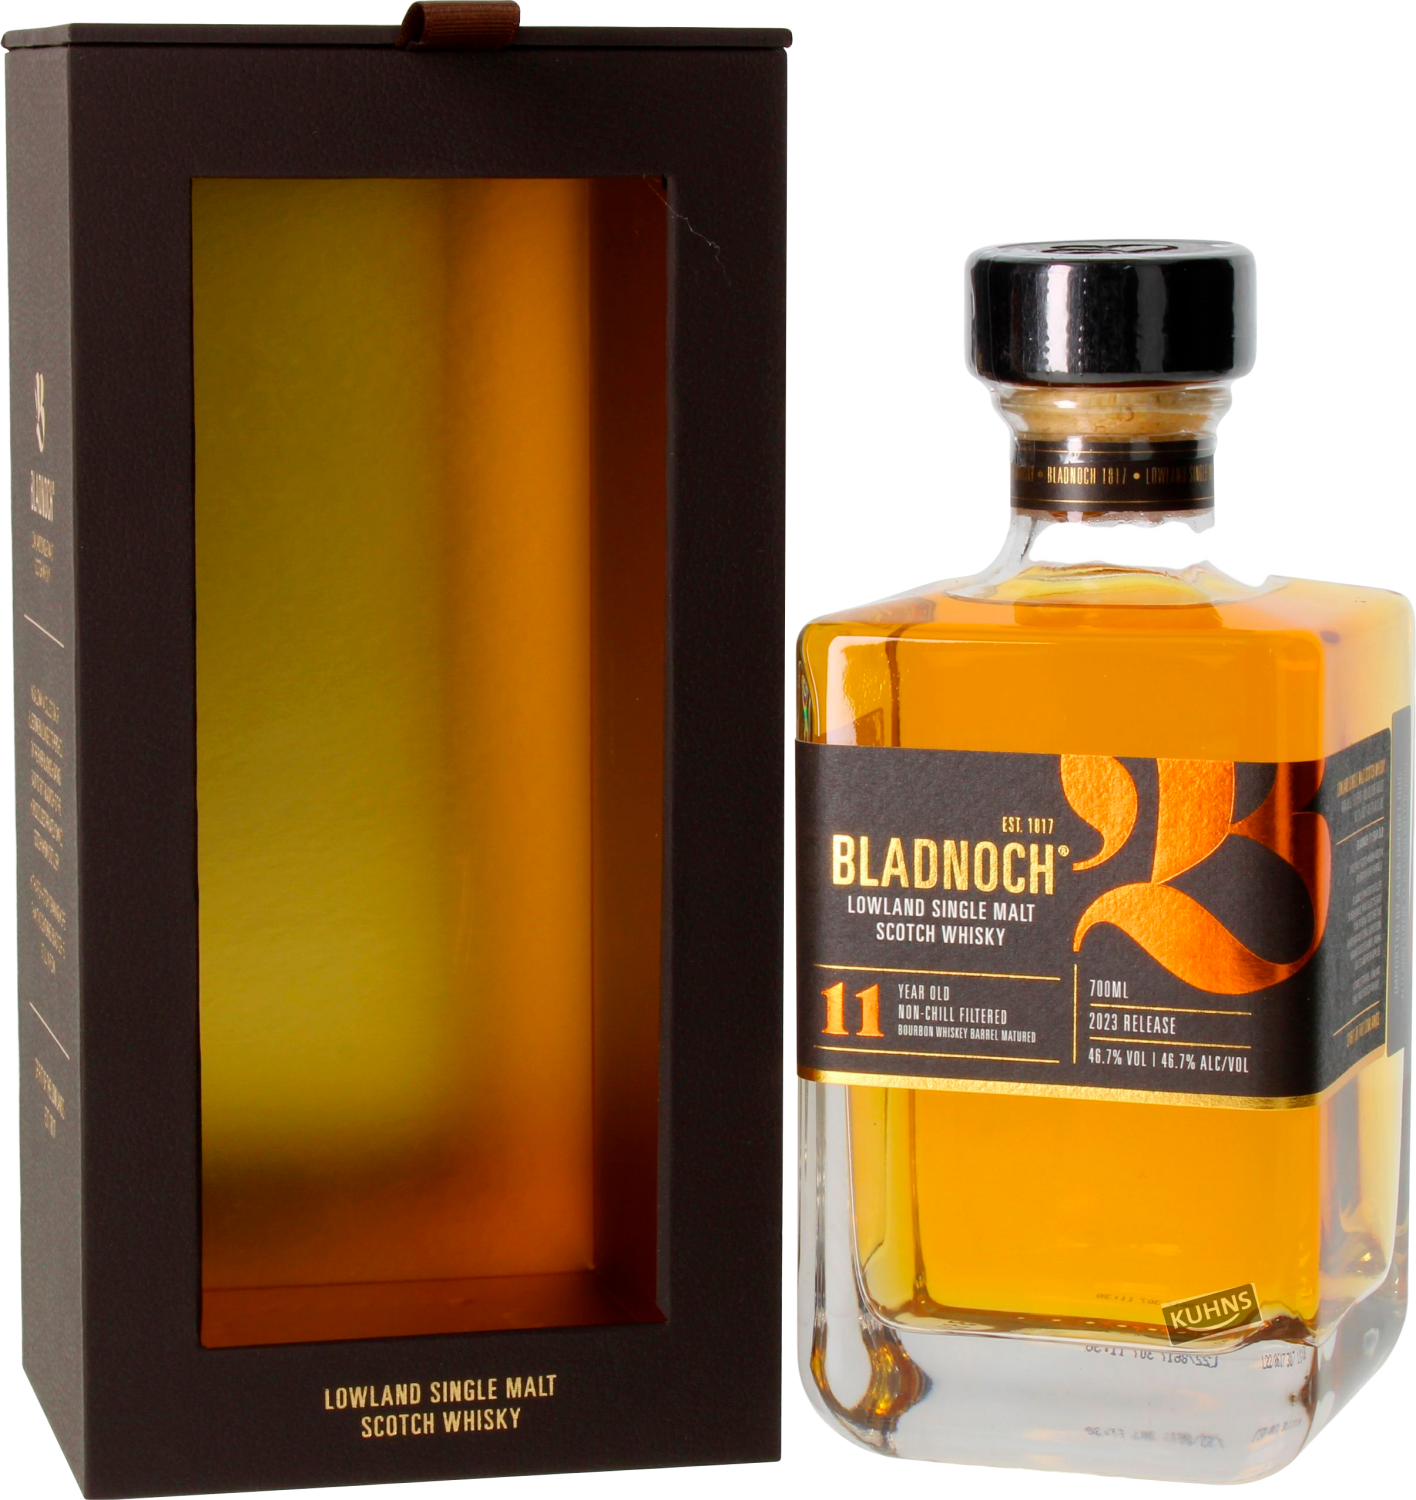 Bladnoch 11 Years Old Single Malt Scotch Whisky (gift box) lagavulin islay single malt scotch whisky 16 years old gift box